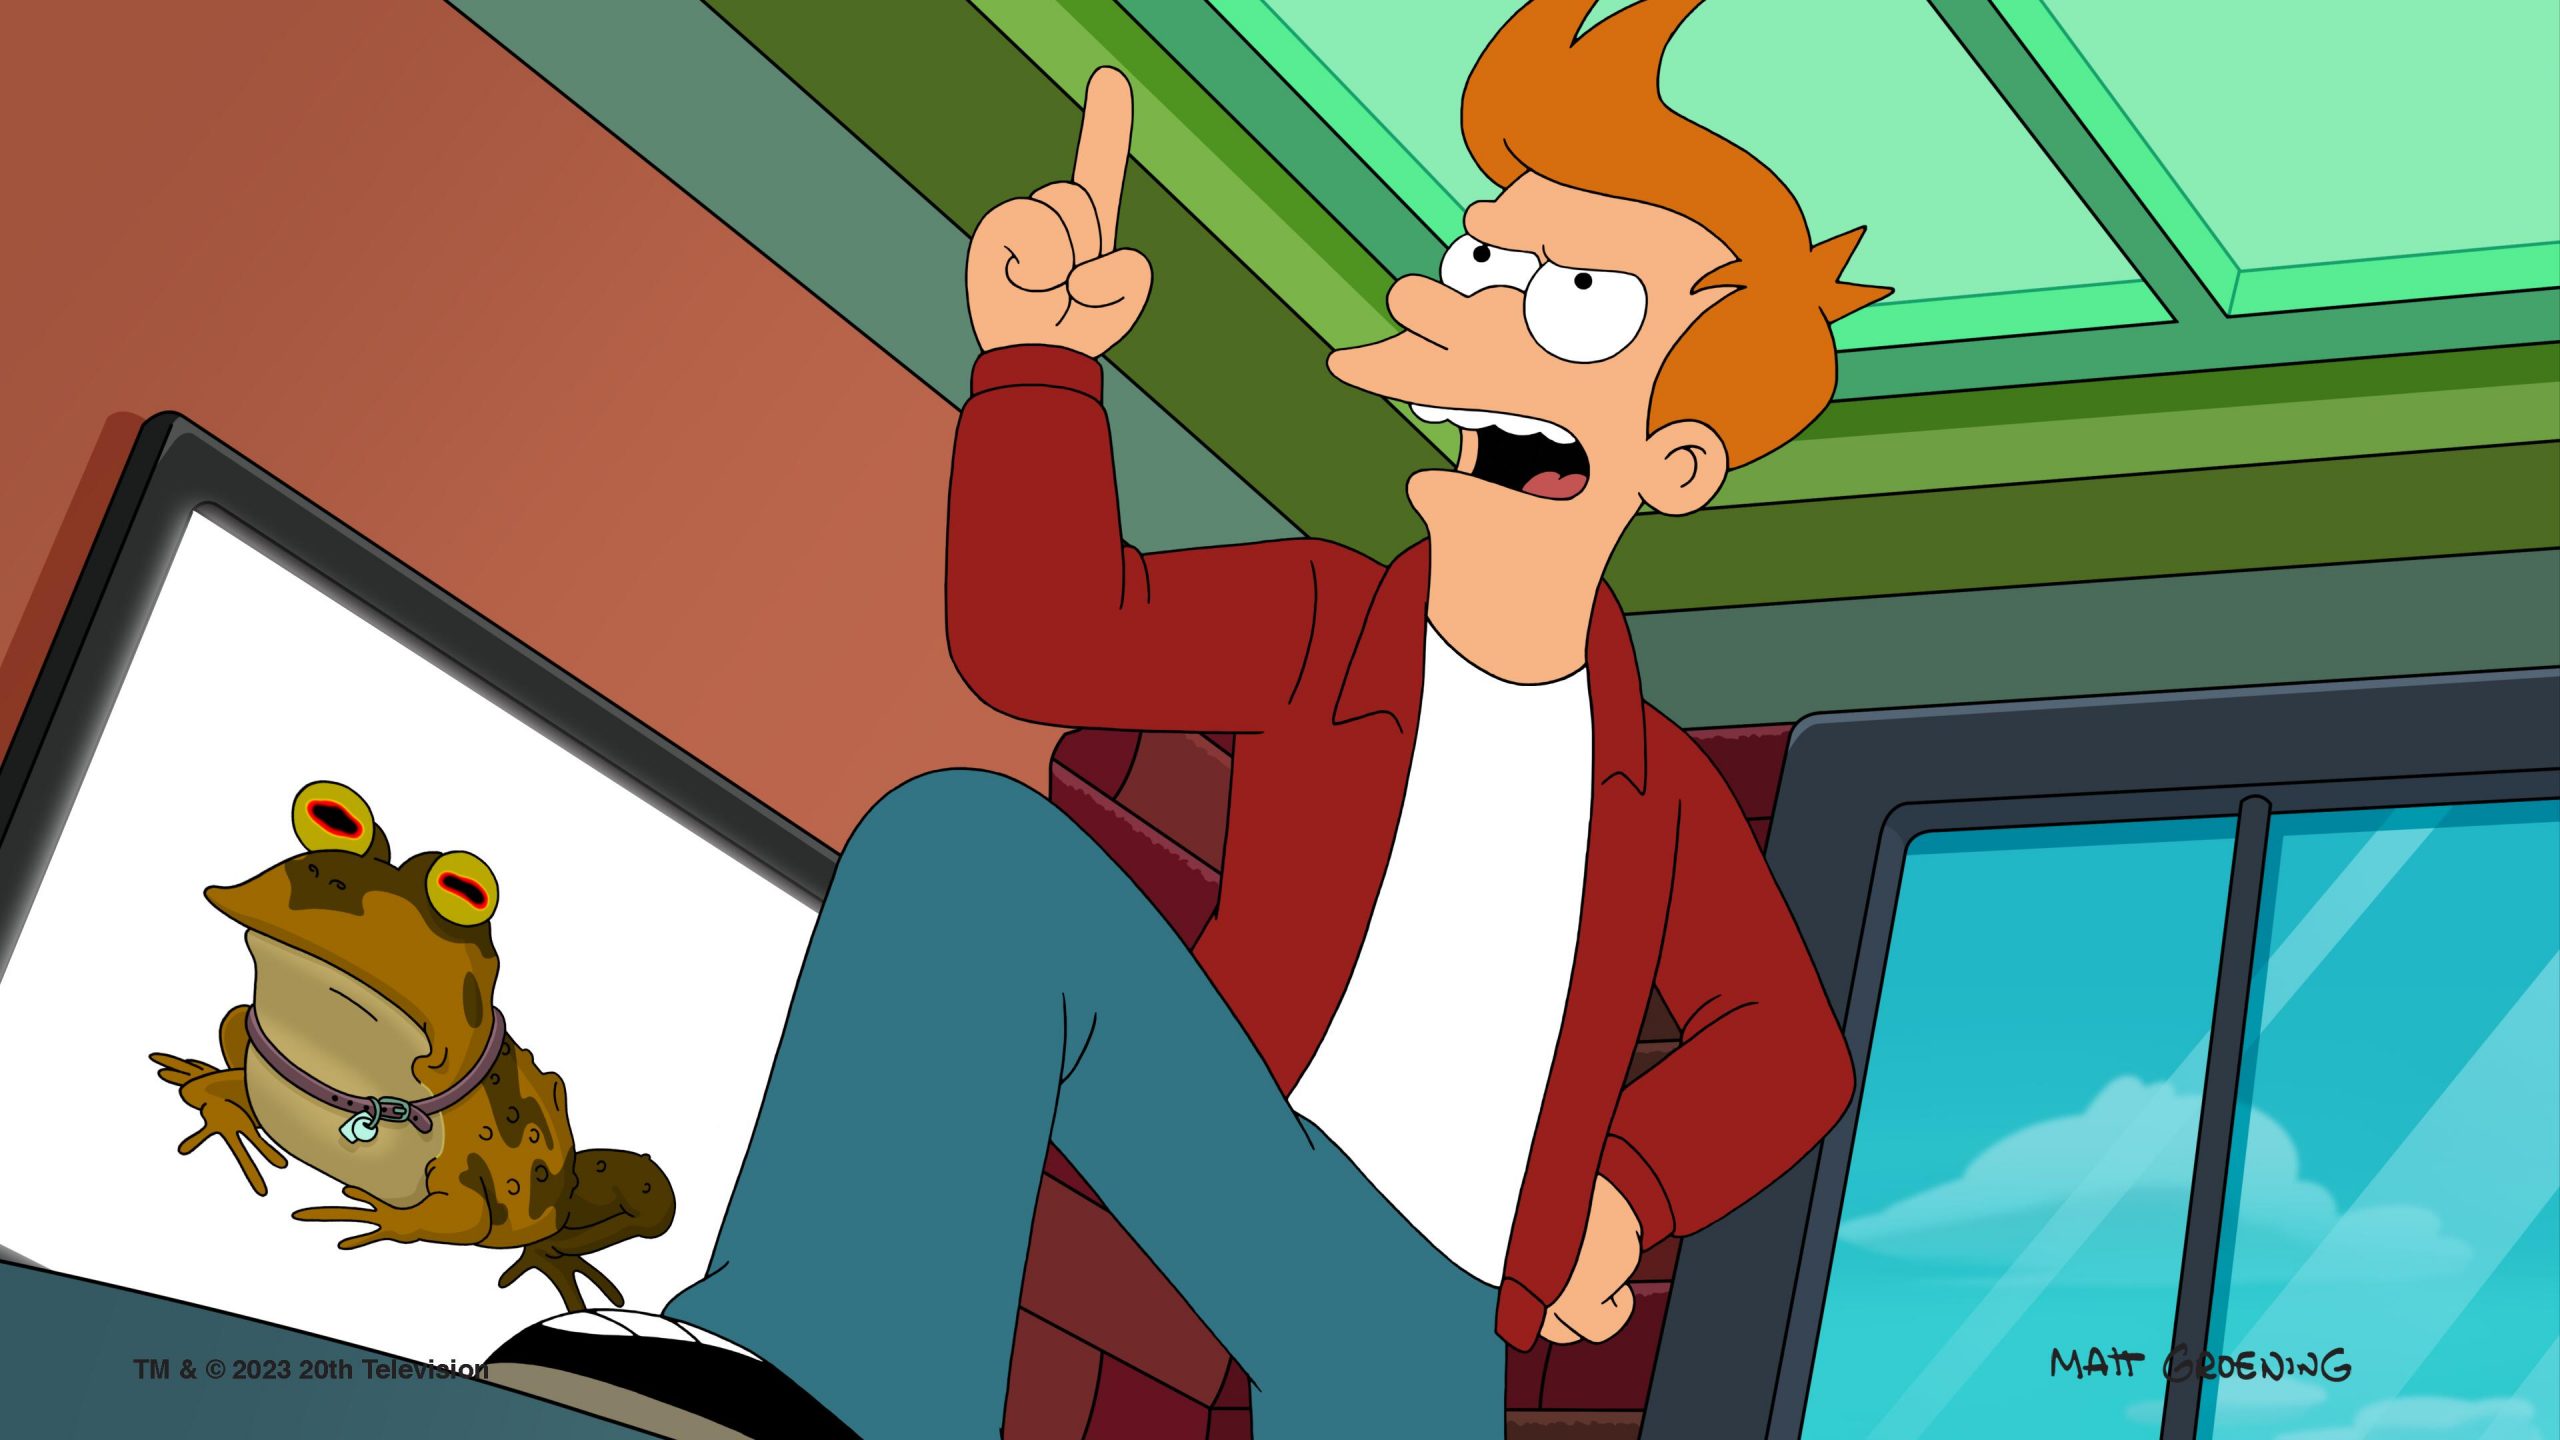 Futurama -- "The Impossible Stream" - Episode 1101 -- Fry risks permanent insanity when he attempts to binge-watch every TV show ever made.